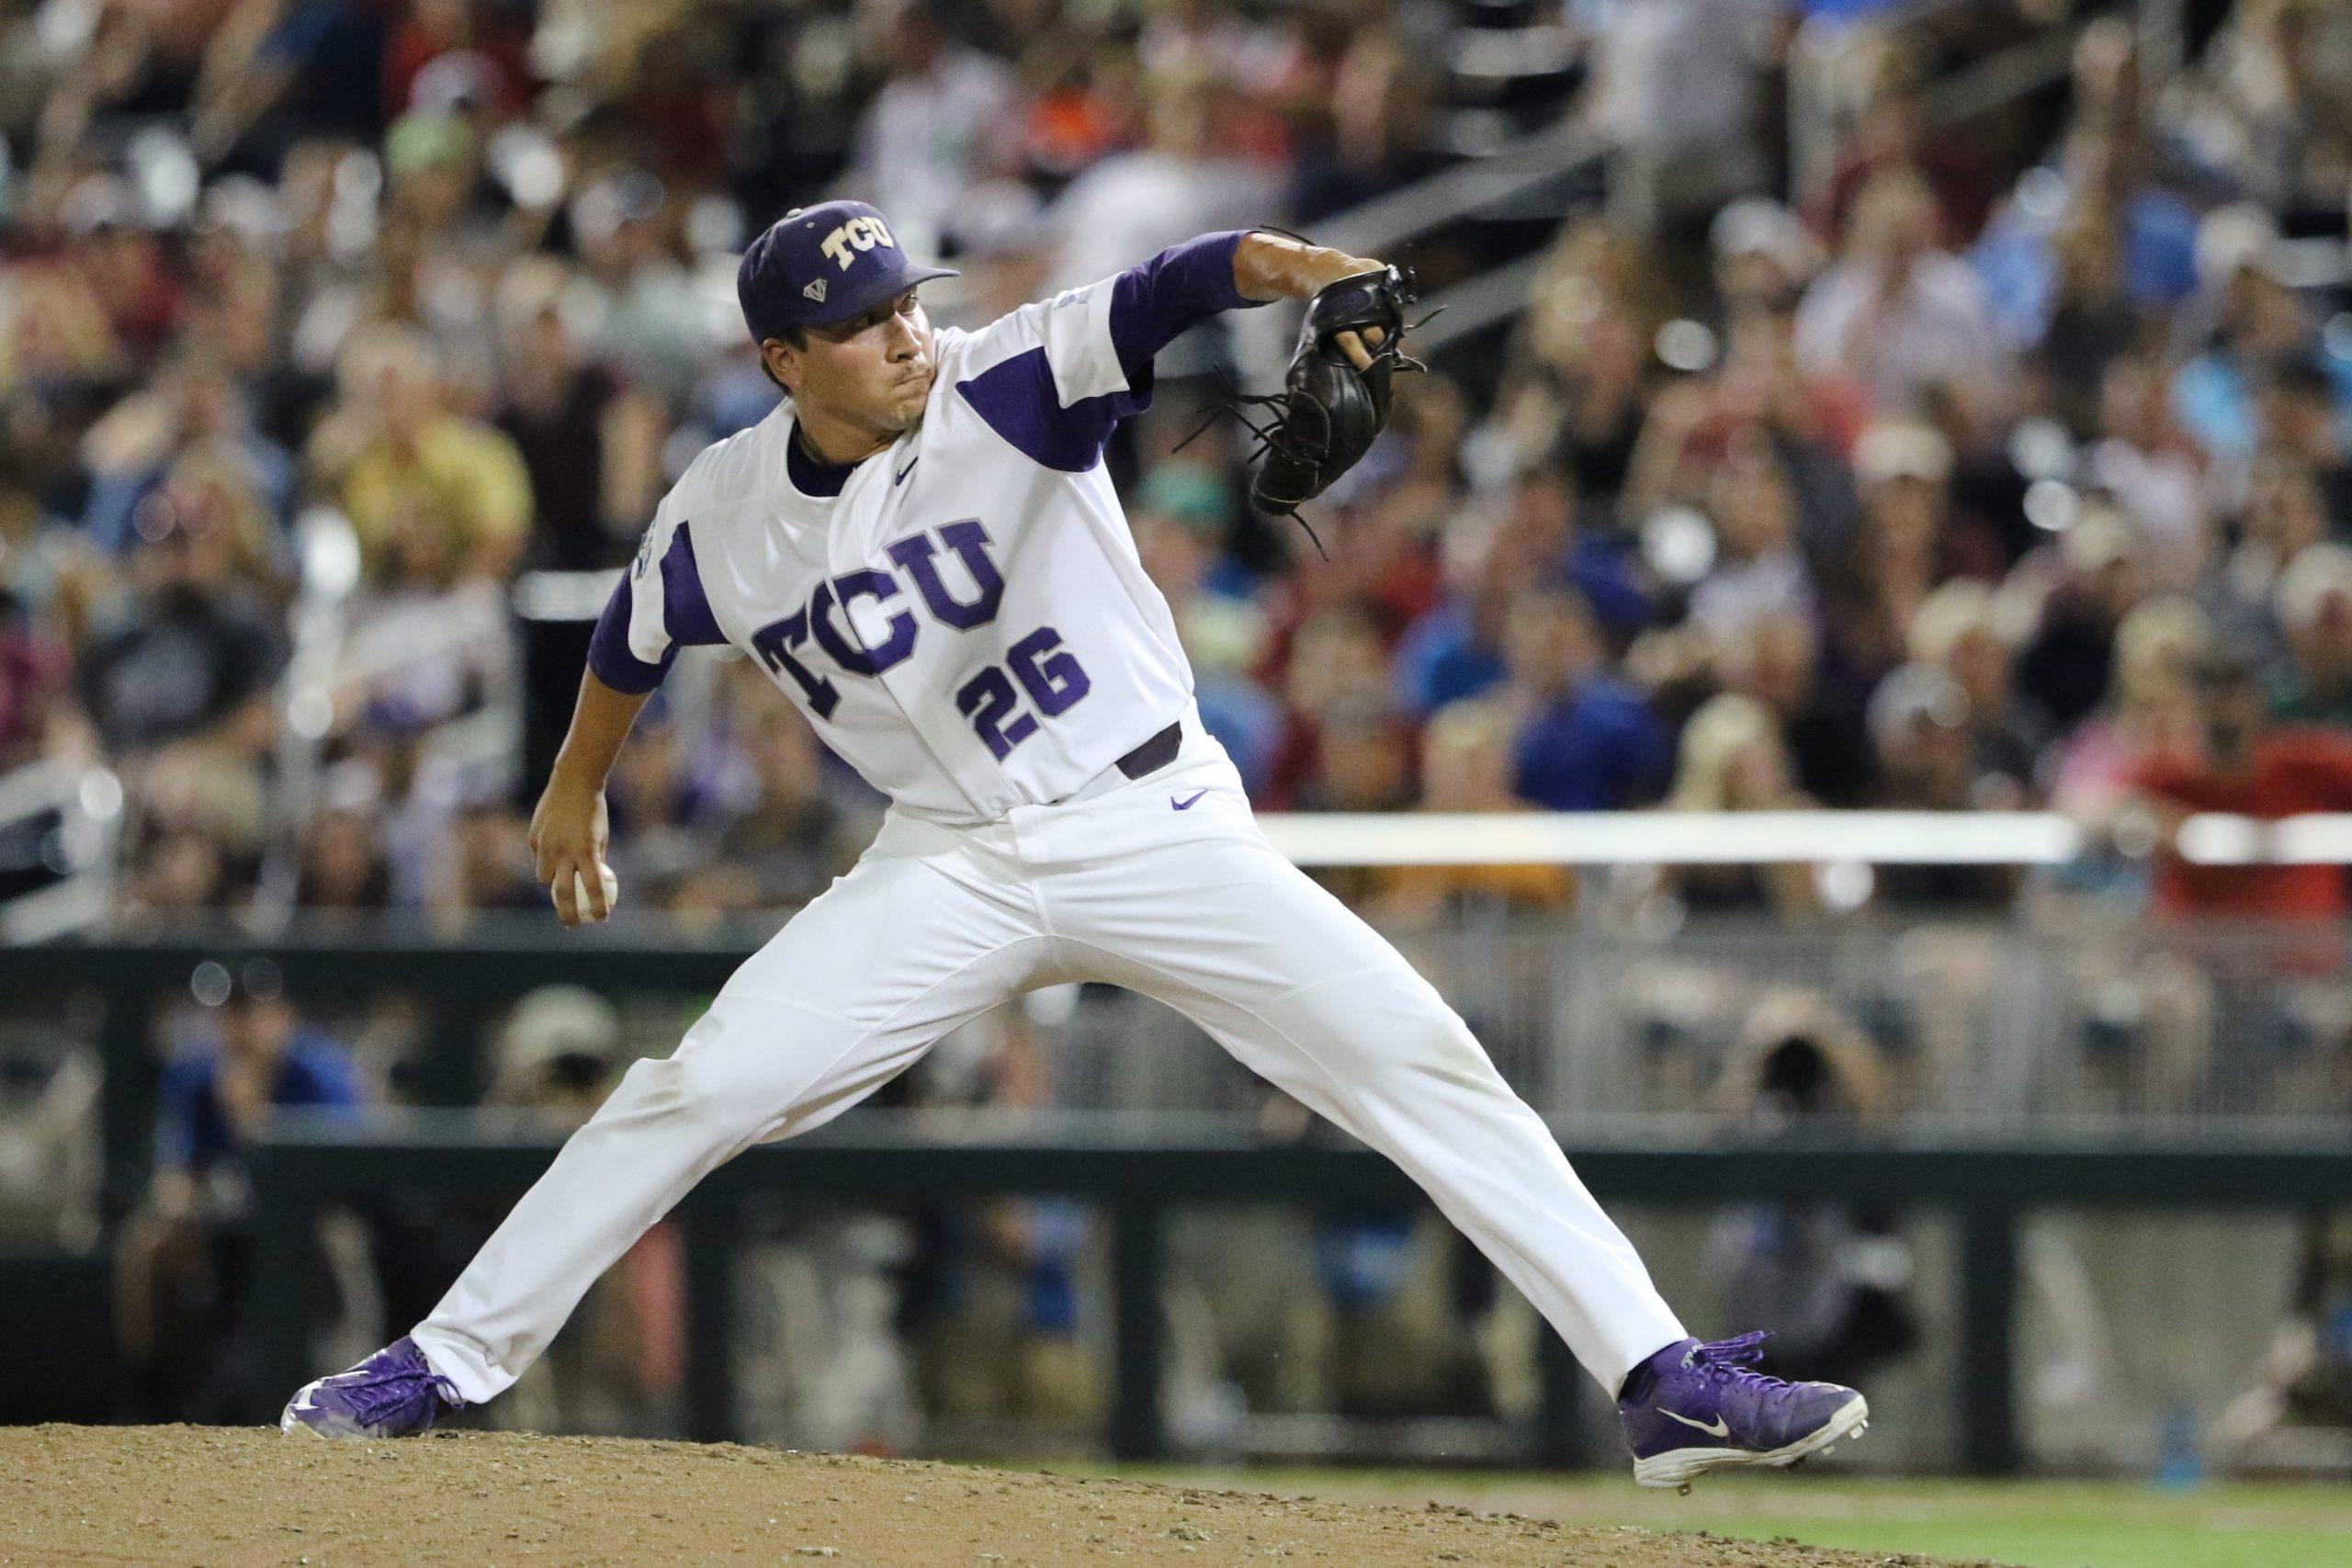 Wymer preserves another TCU victory to end Louisville's season